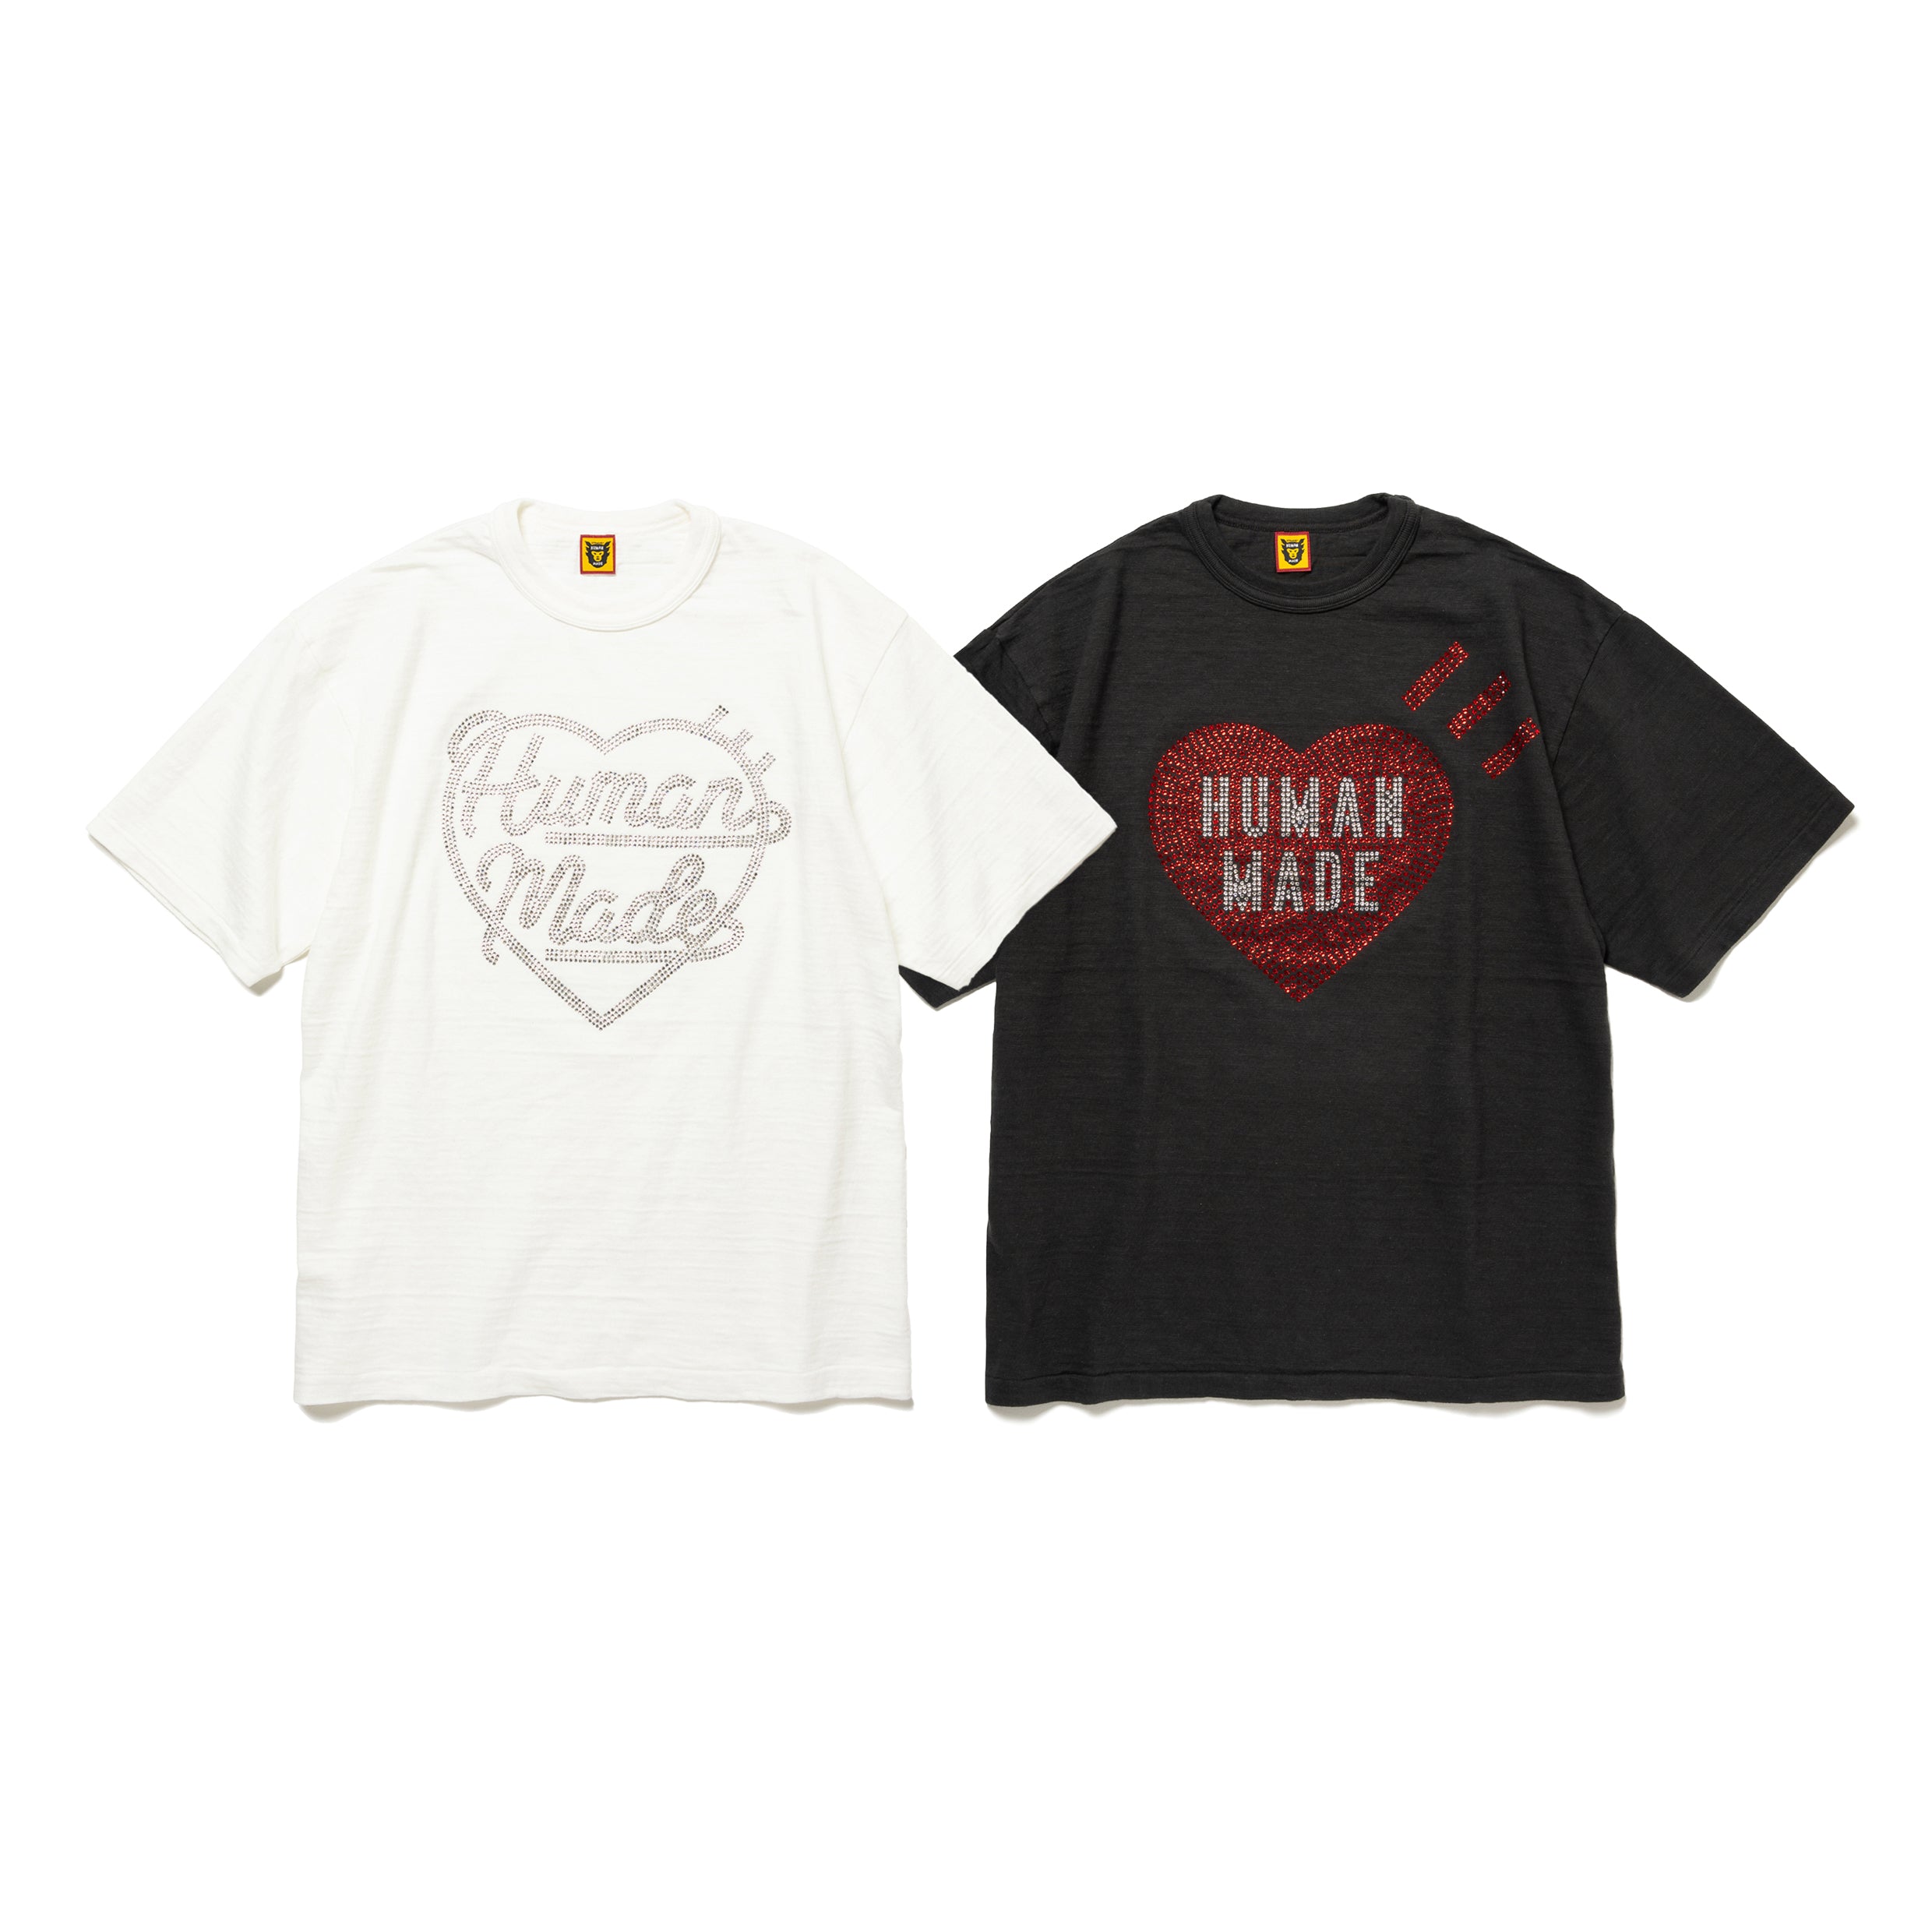 CRYSTAL HEART T-SHIRT」発売のお知らせ – HUMAN MADE ONLINE STORE